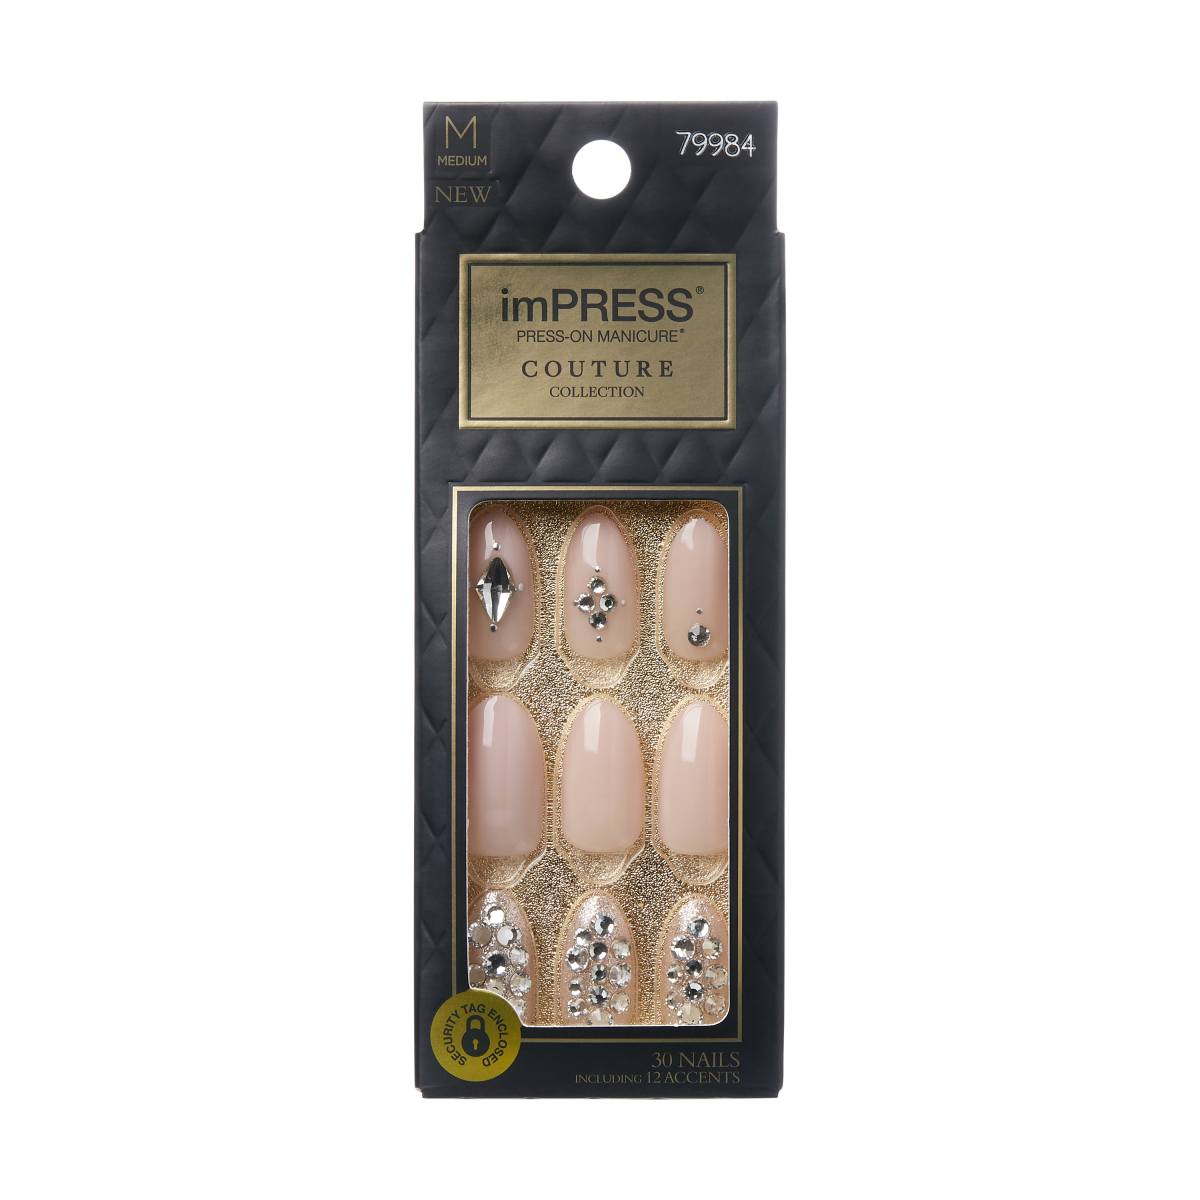 imPRESS Press-On Manicure Couture Collection - Supreme